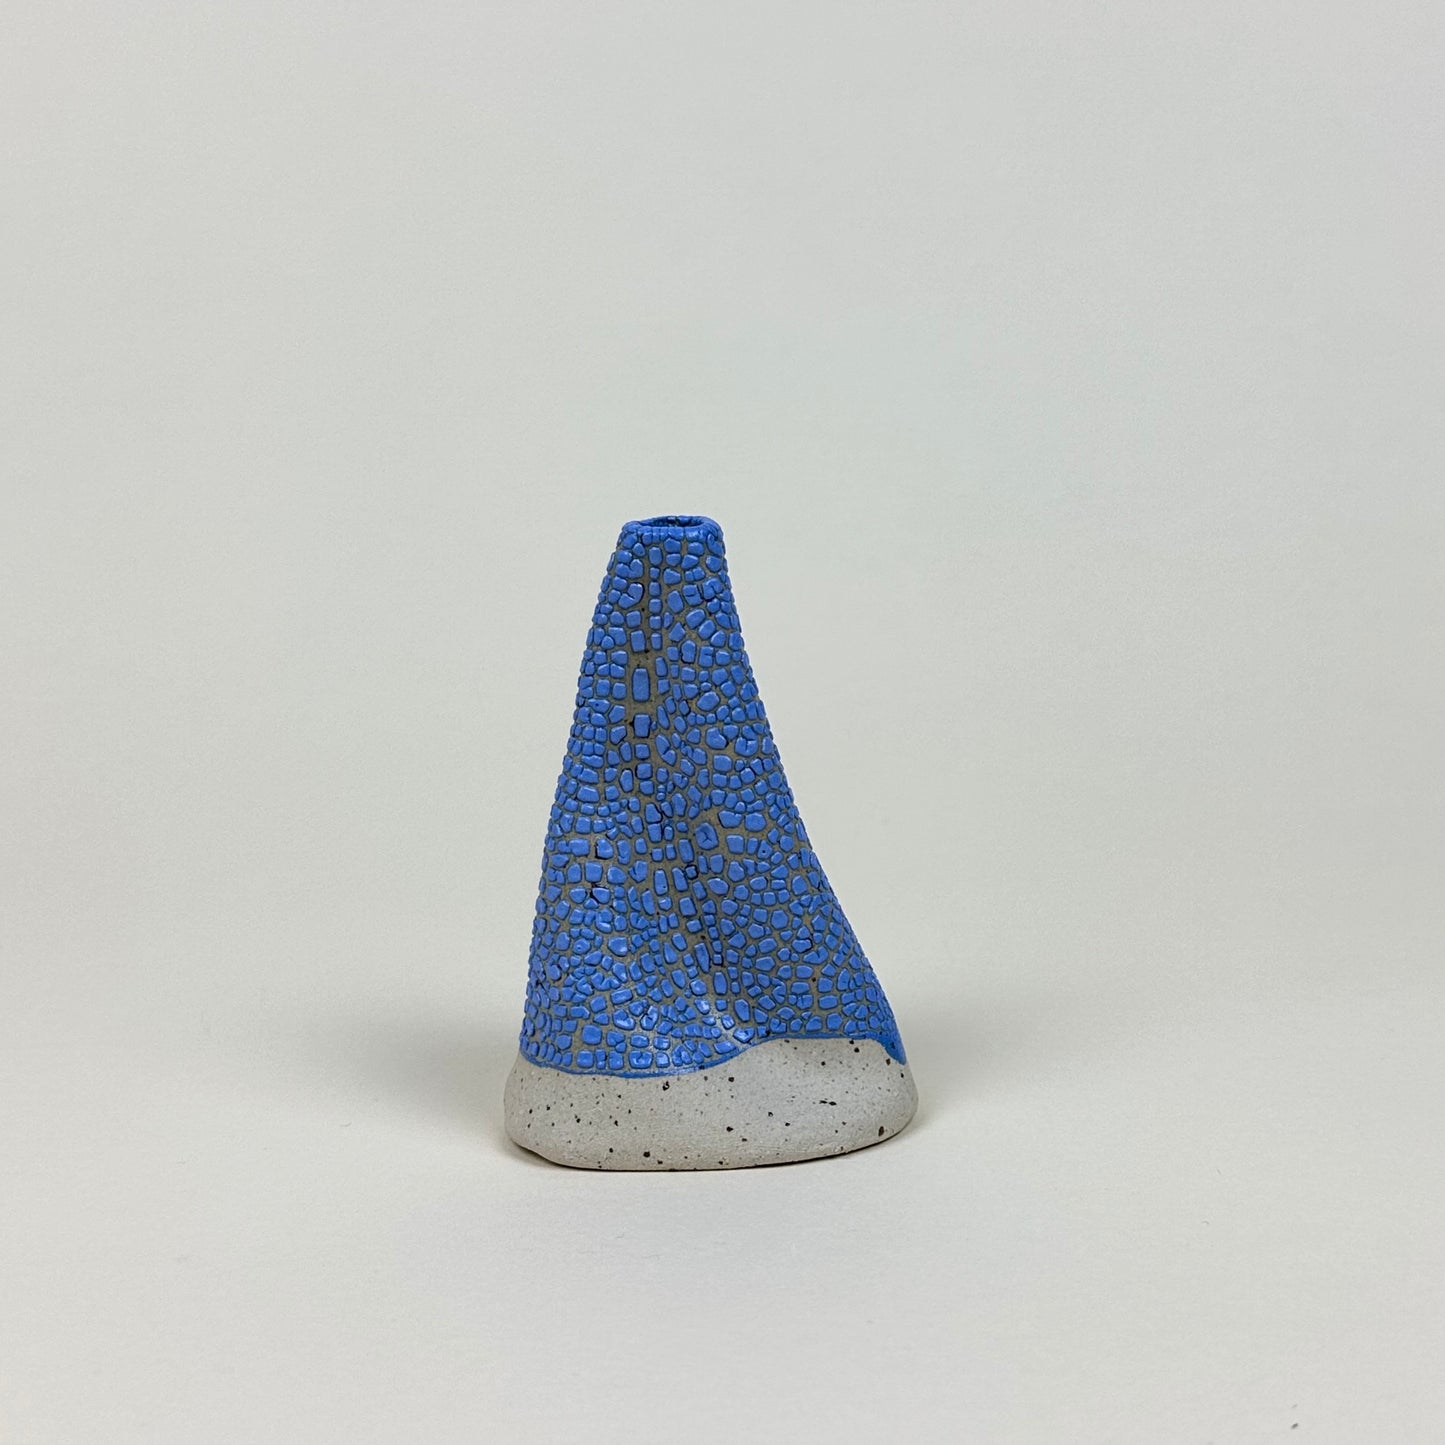 Stone and blue volcano vase (S) by Astrid Öhman